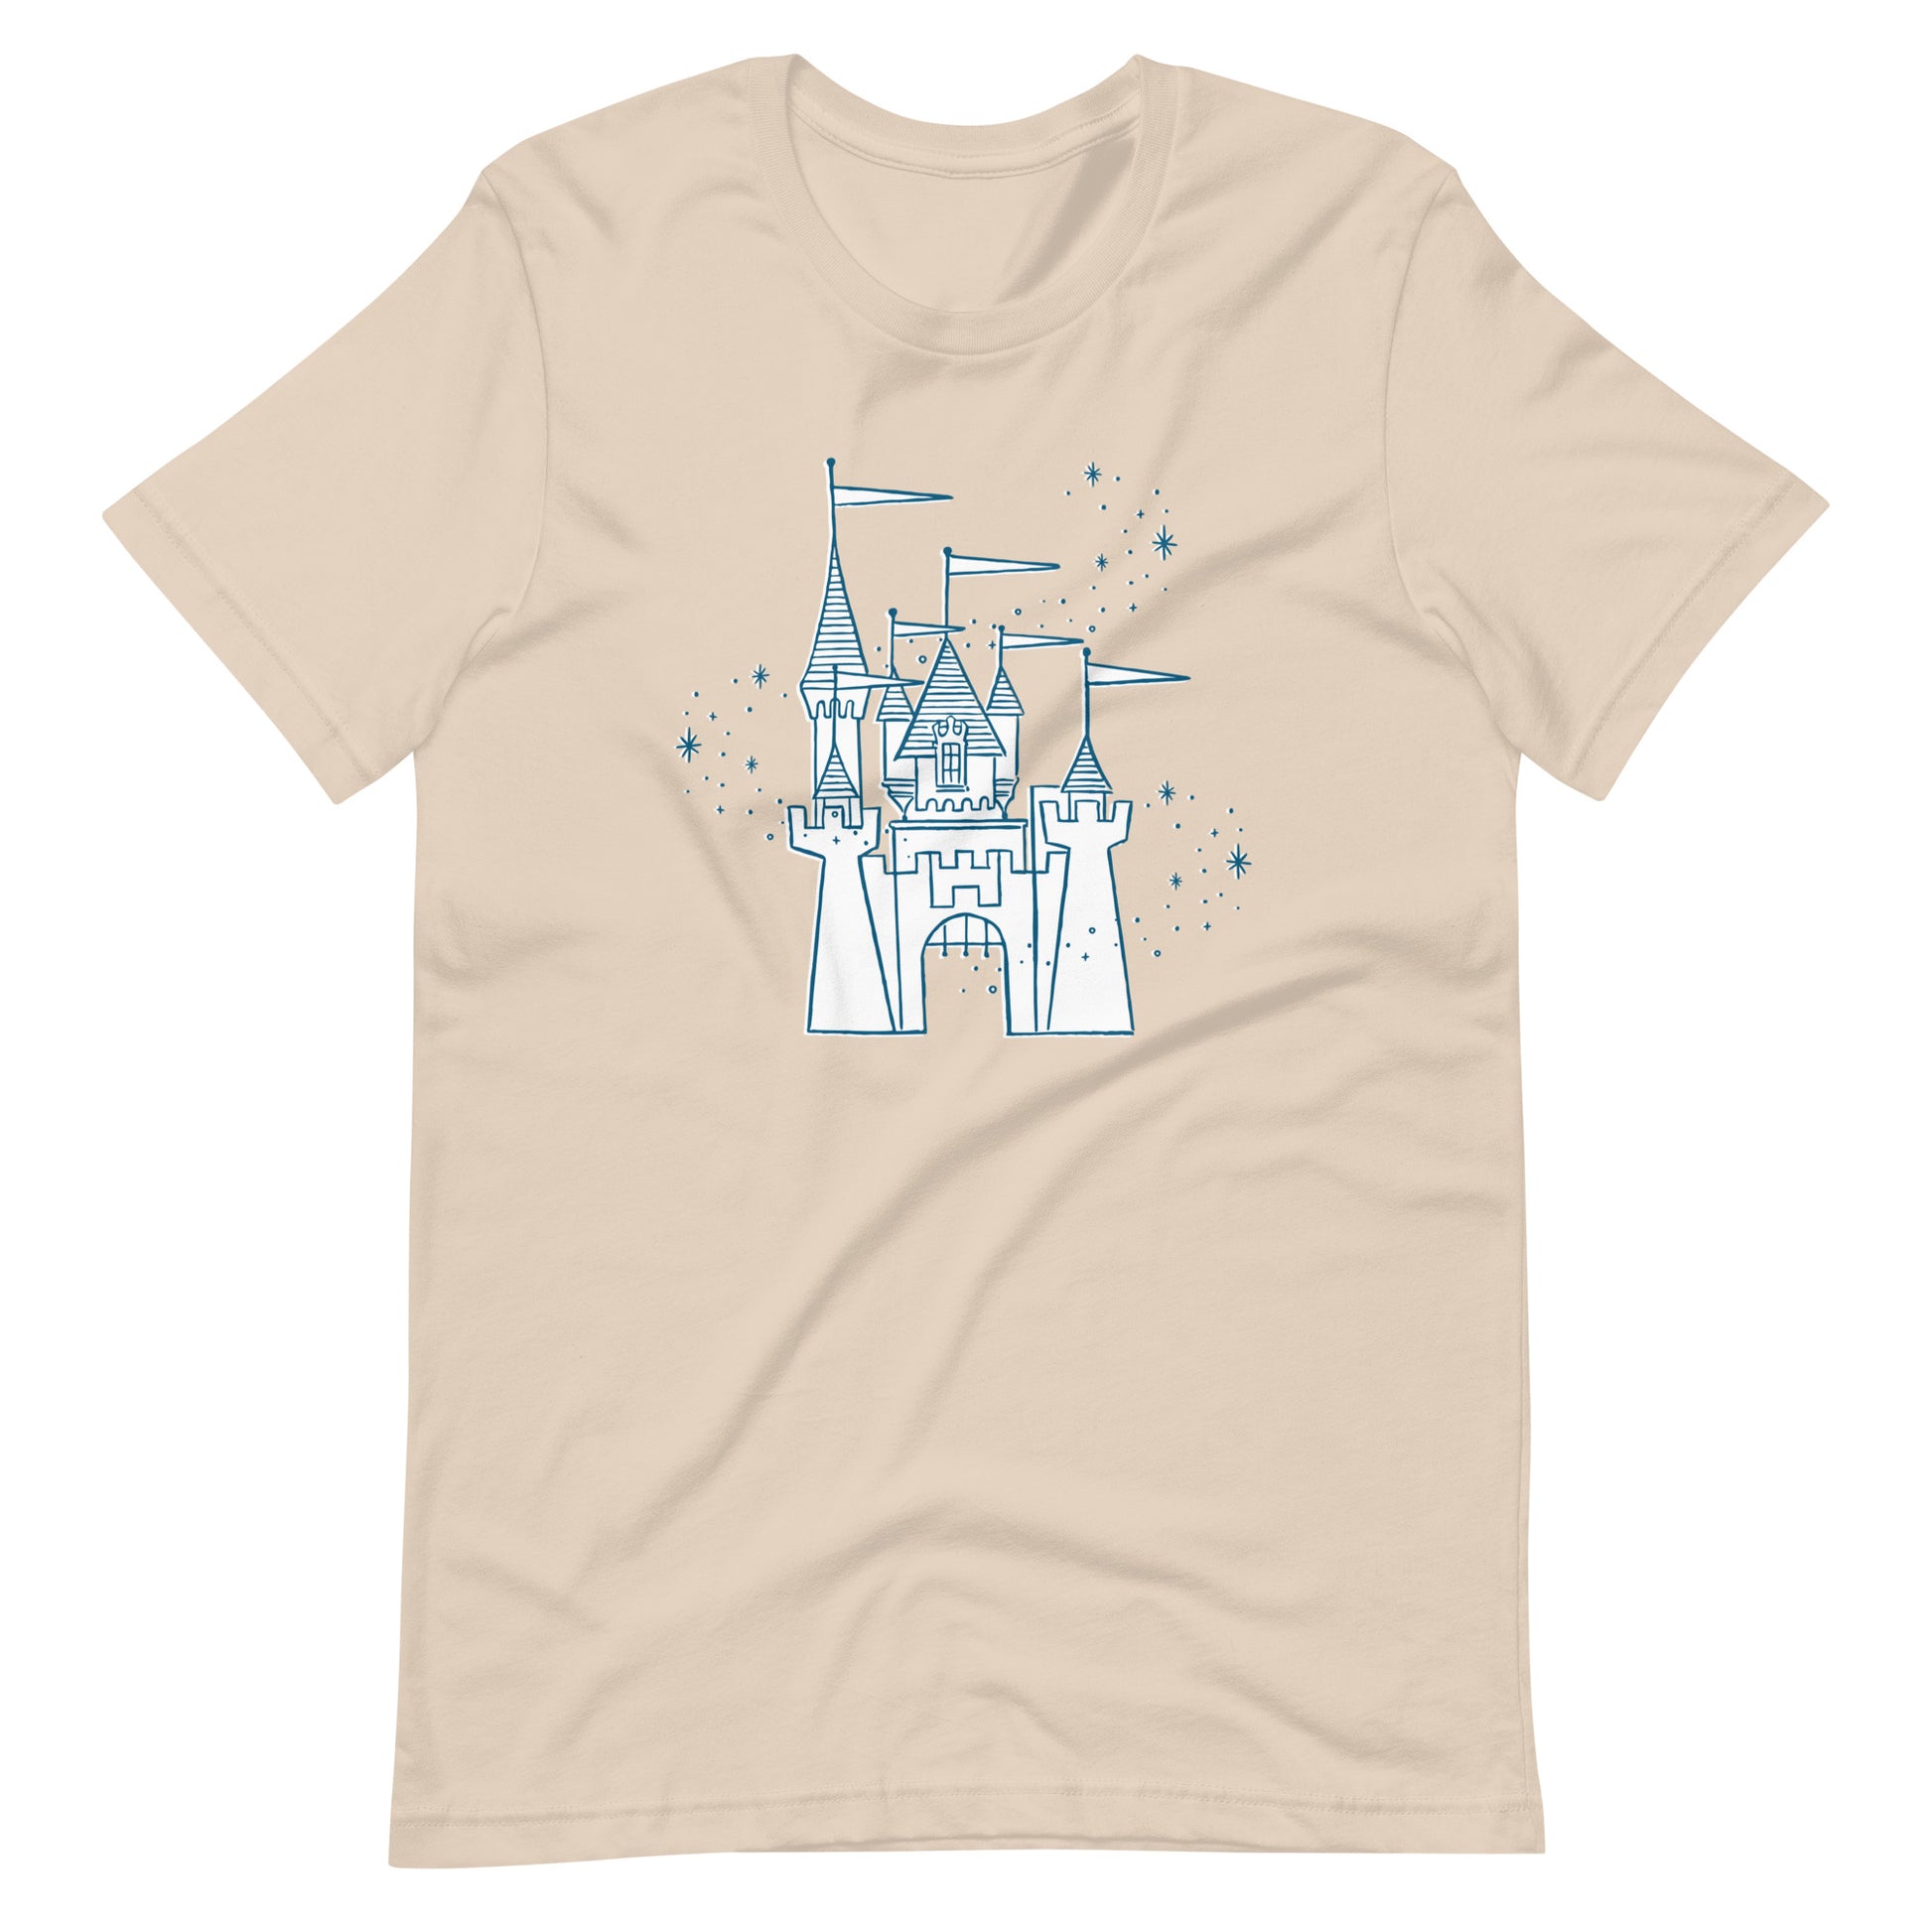 Cream shirt printed with vintage style sketch of the Disneyland Castle and pixie dust above the castle.